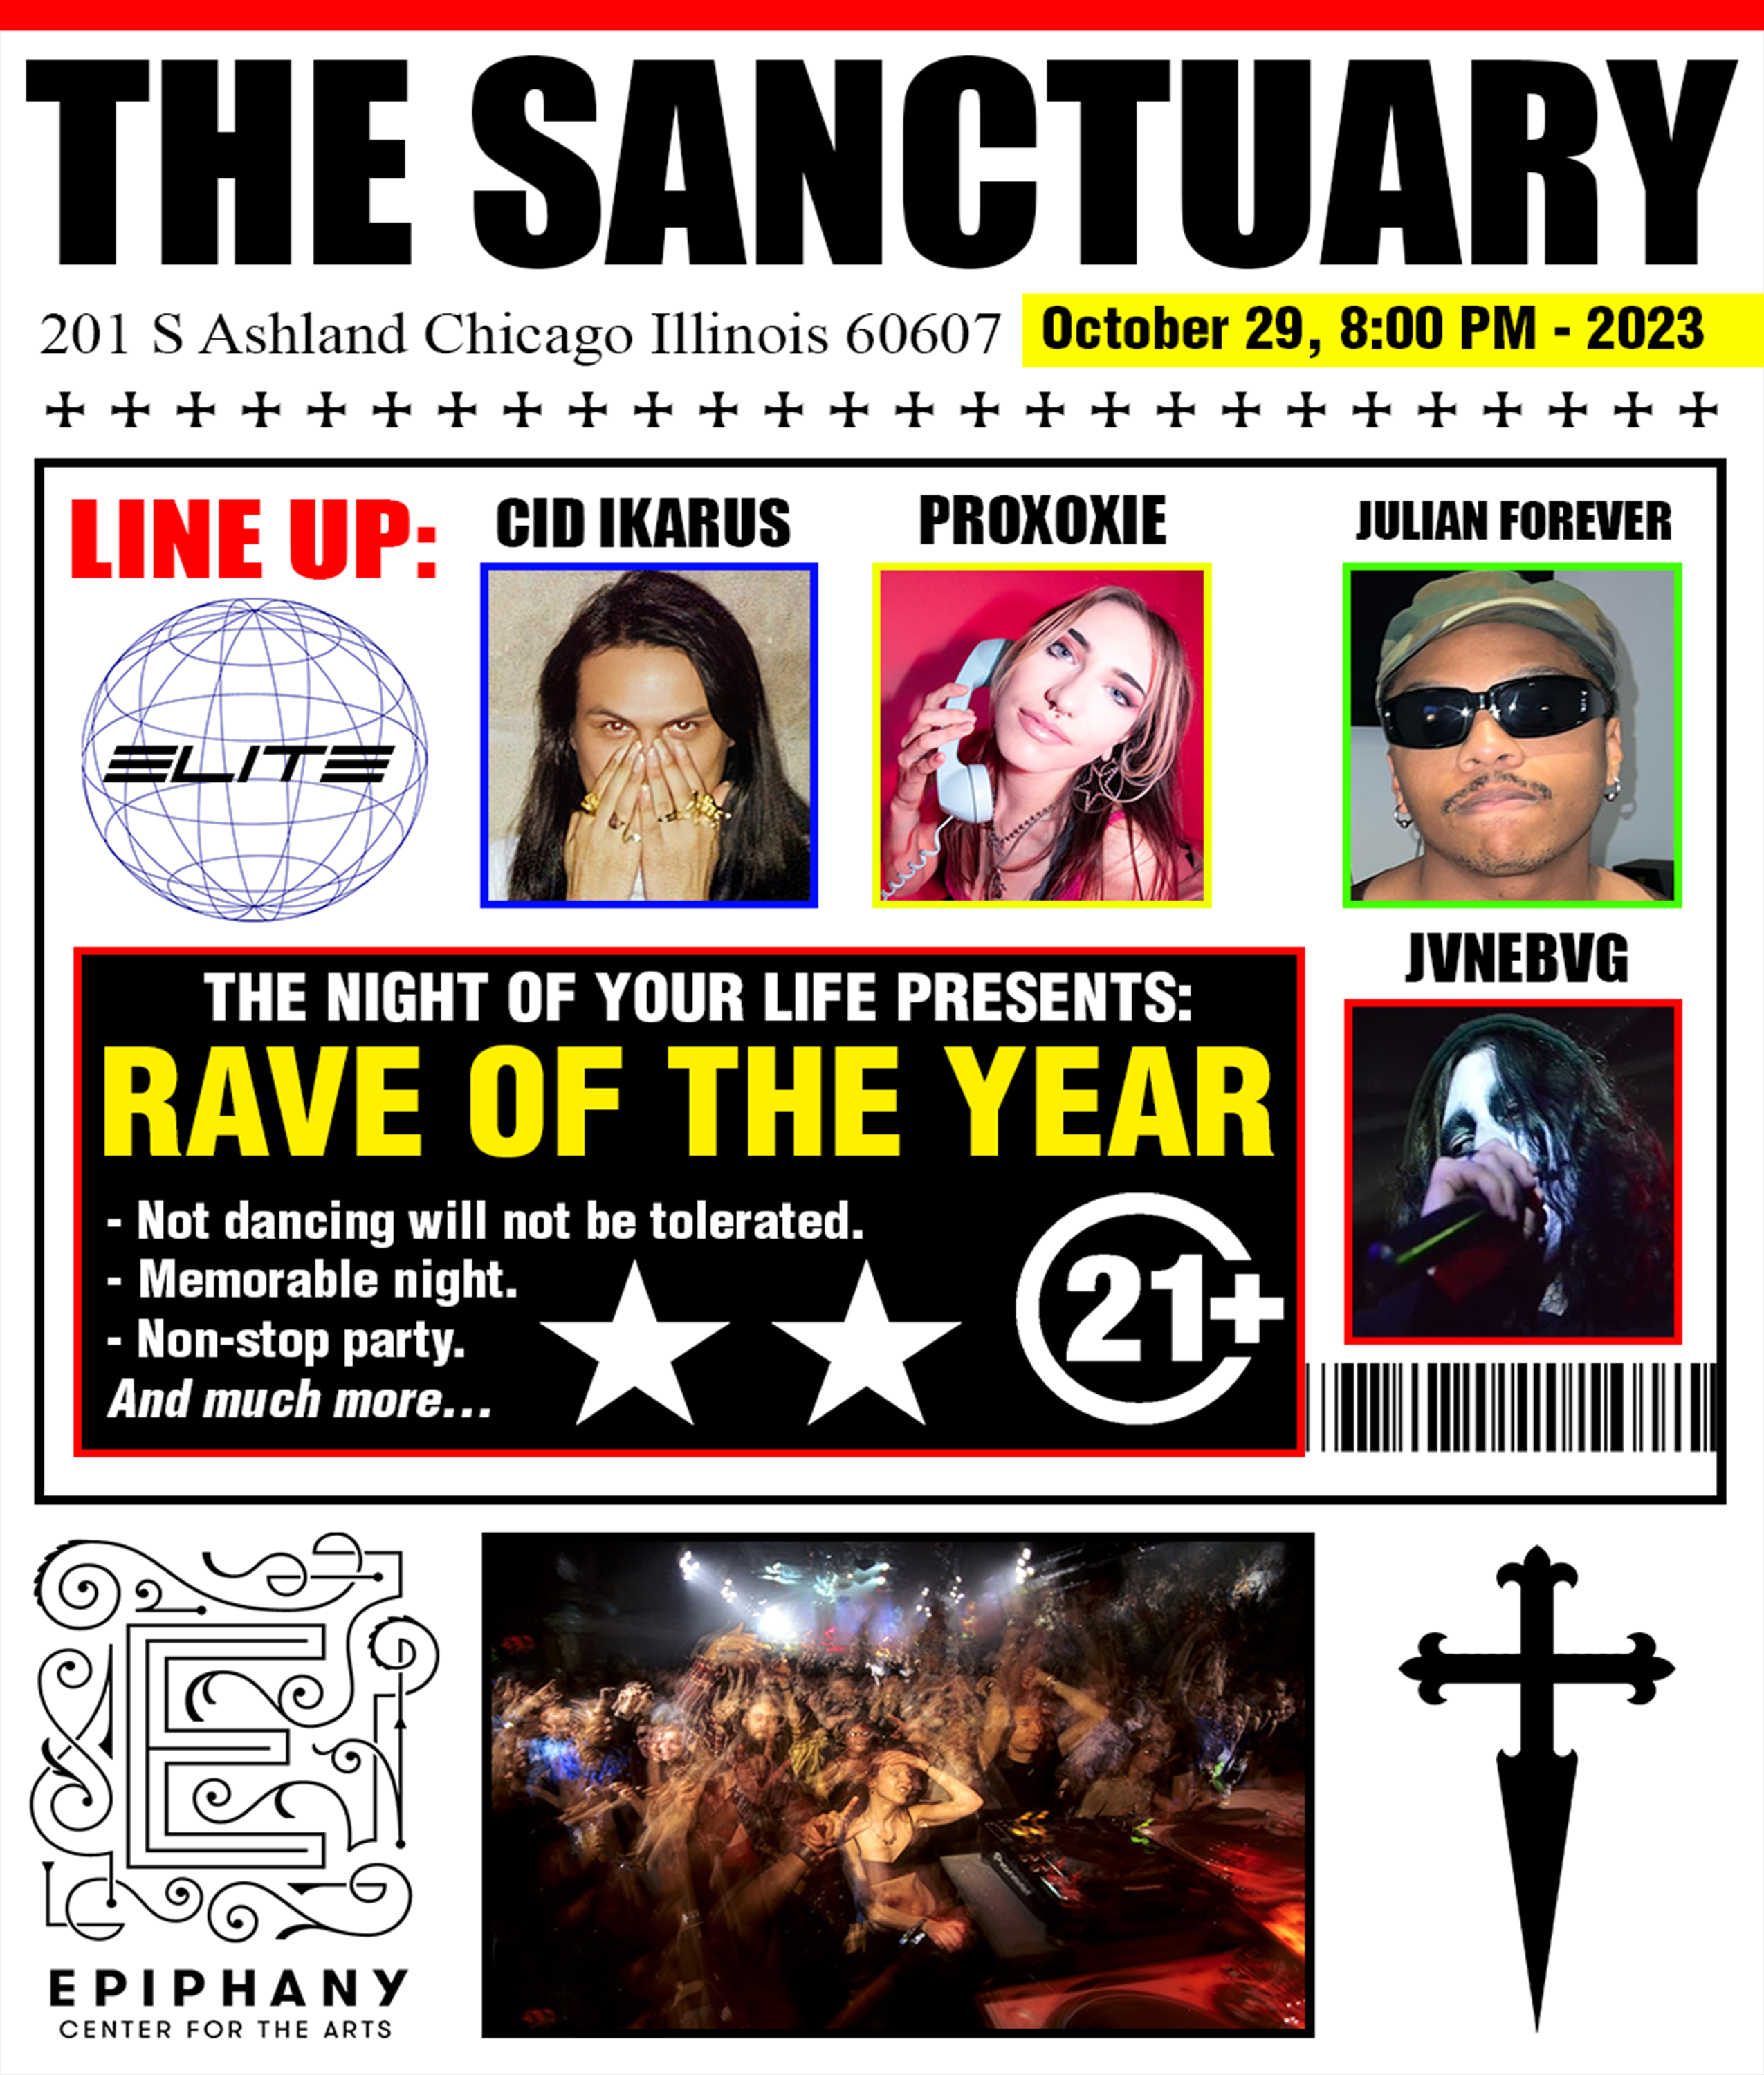 PROXOXIE, CID IKARUS, JVNEBVG, JULIAN FOREVER; Rave of the Year - フライヤー表